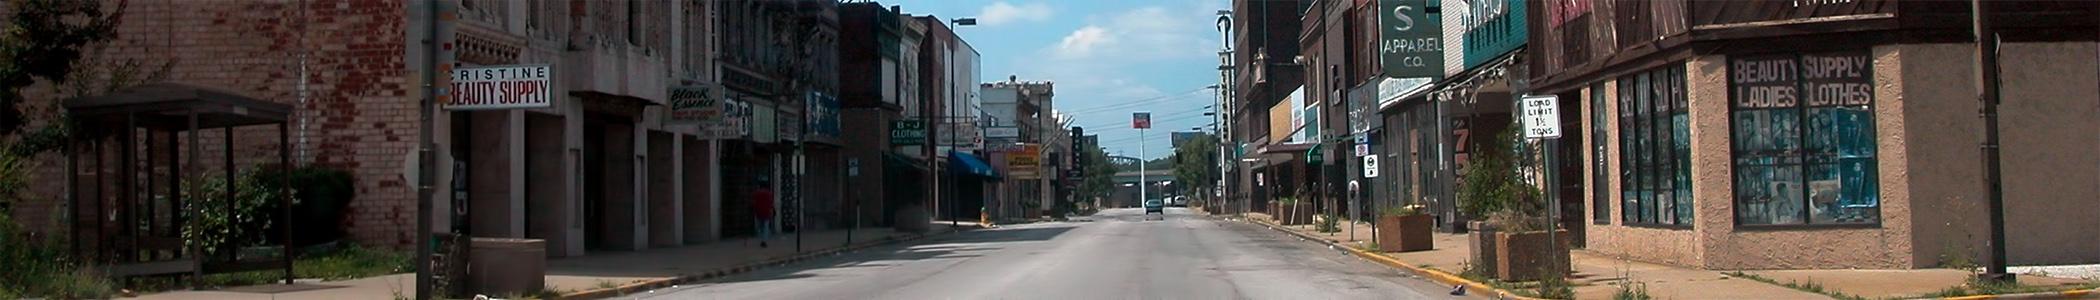 Banner image for East Saint Louis on GigsGuide